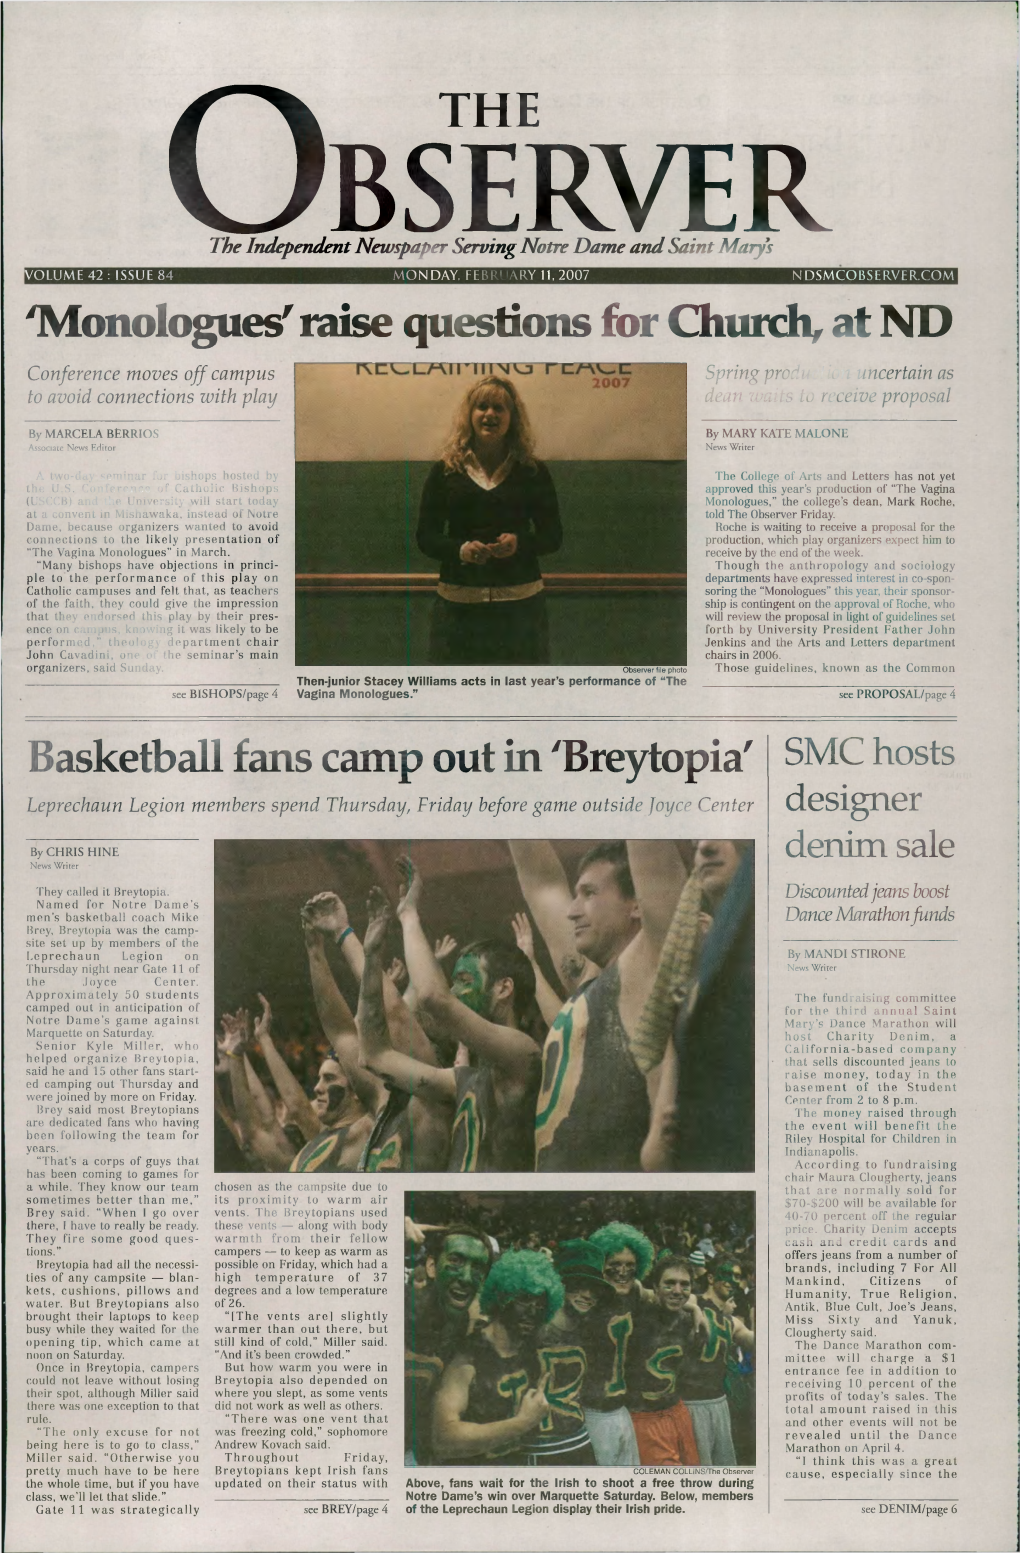 'Monologues' Raise Questions for Church, at ND